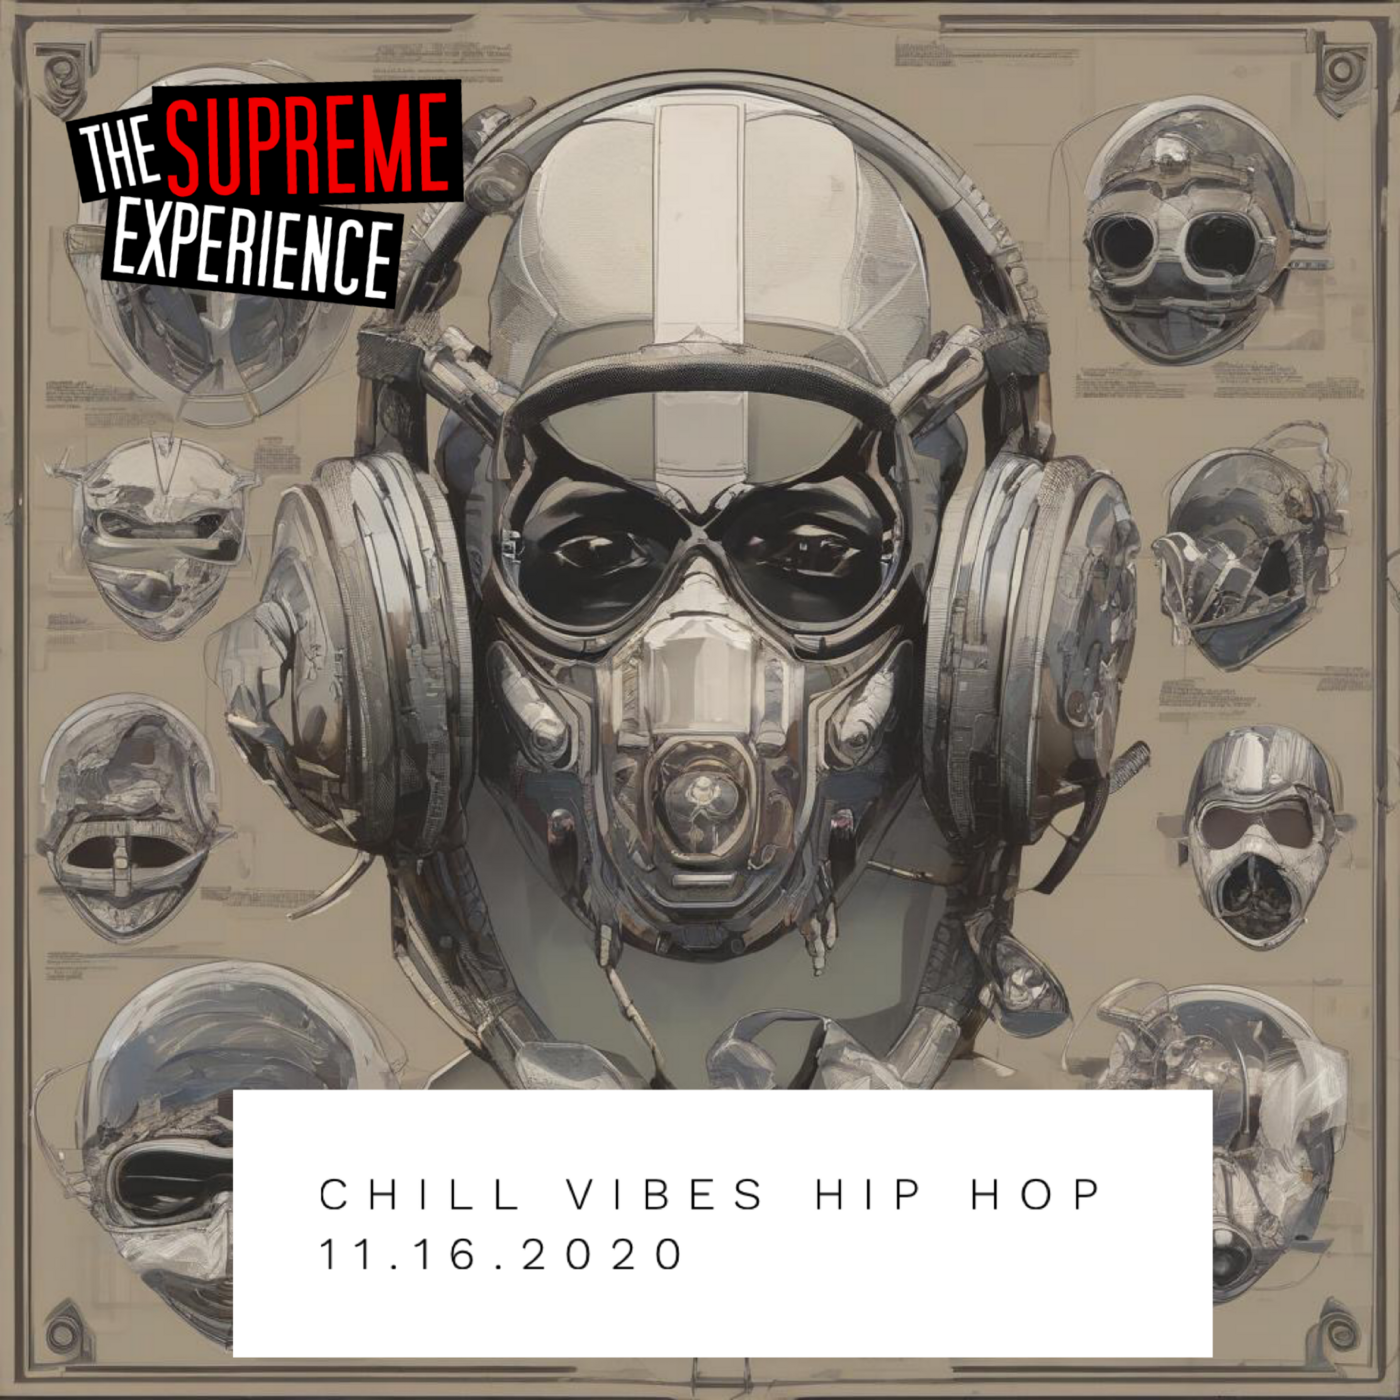 Episode 2: The Supreme Experience Free 11.16.2020